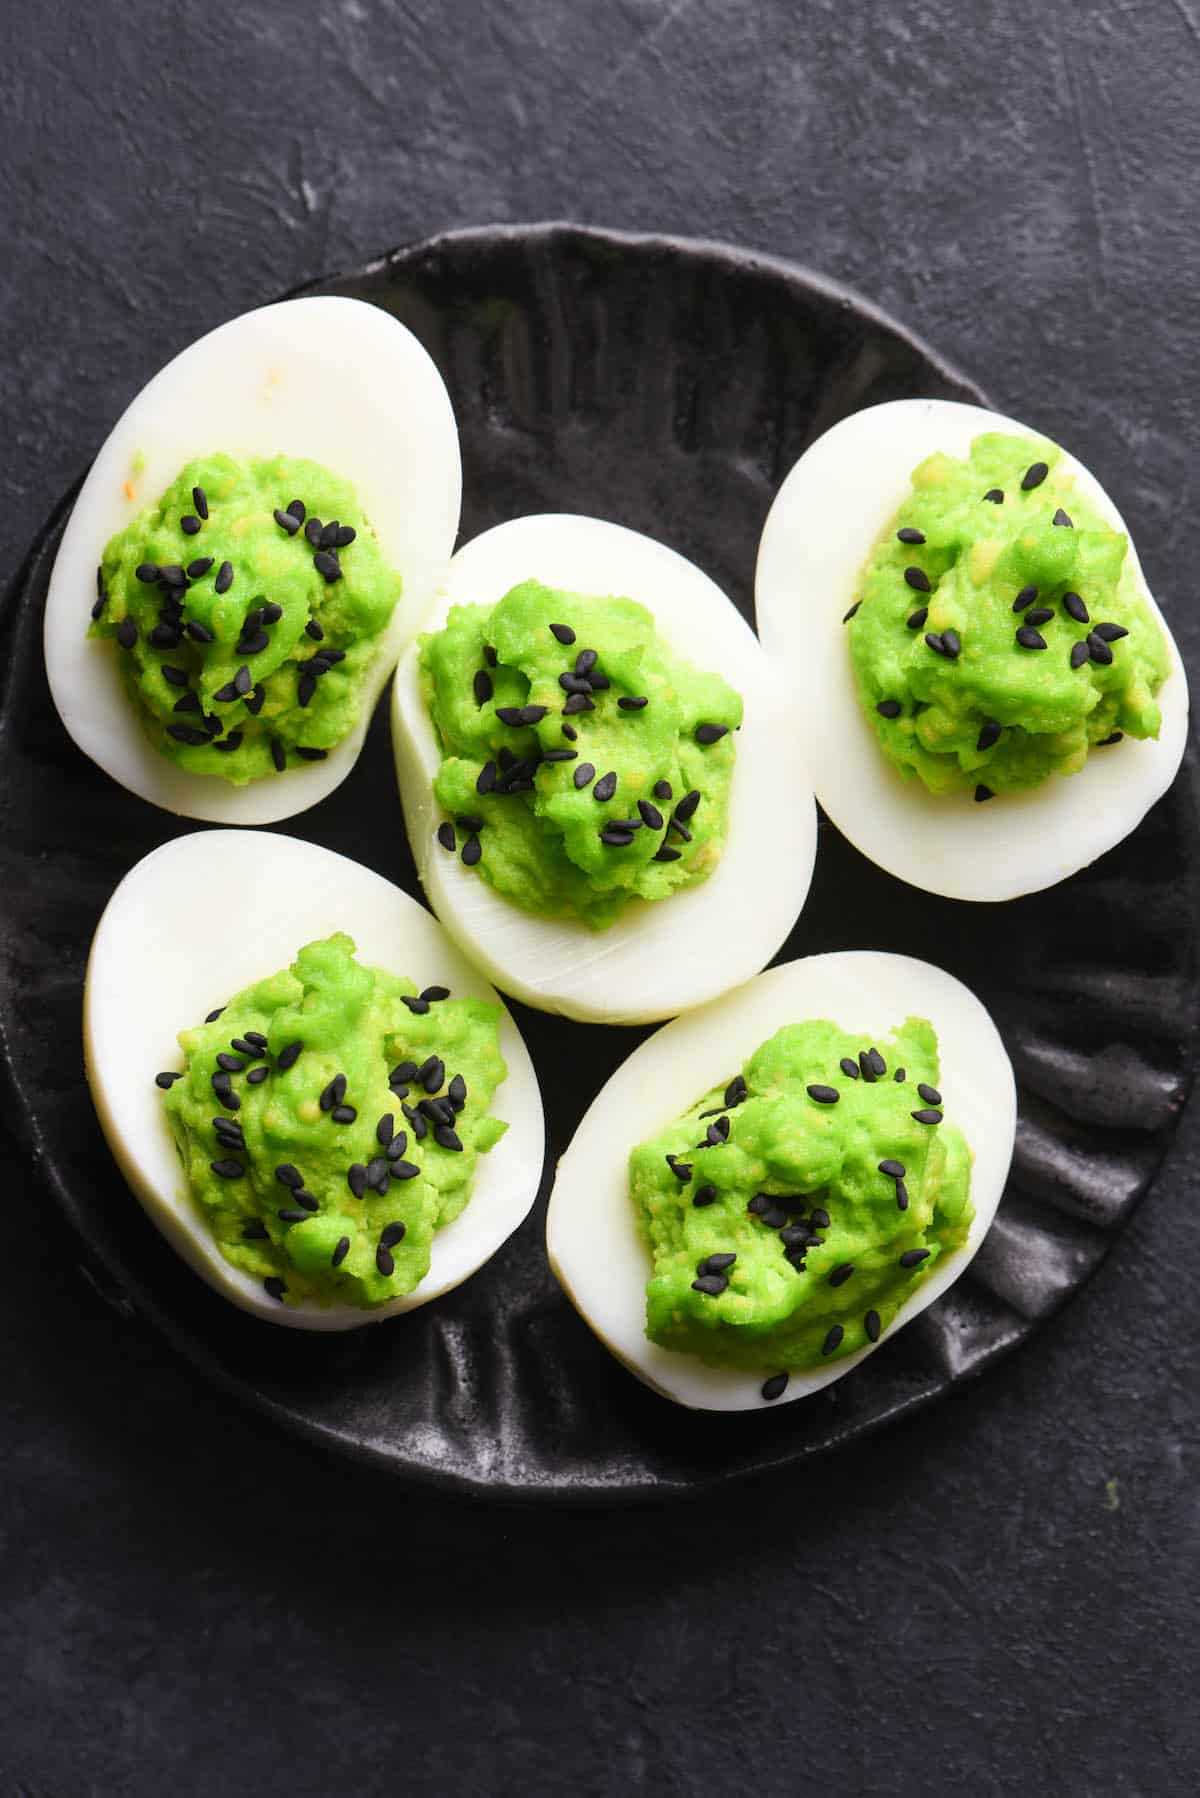 Spooky deviled eggs with dyed neon green yolks, decorated with black sesame seeds.